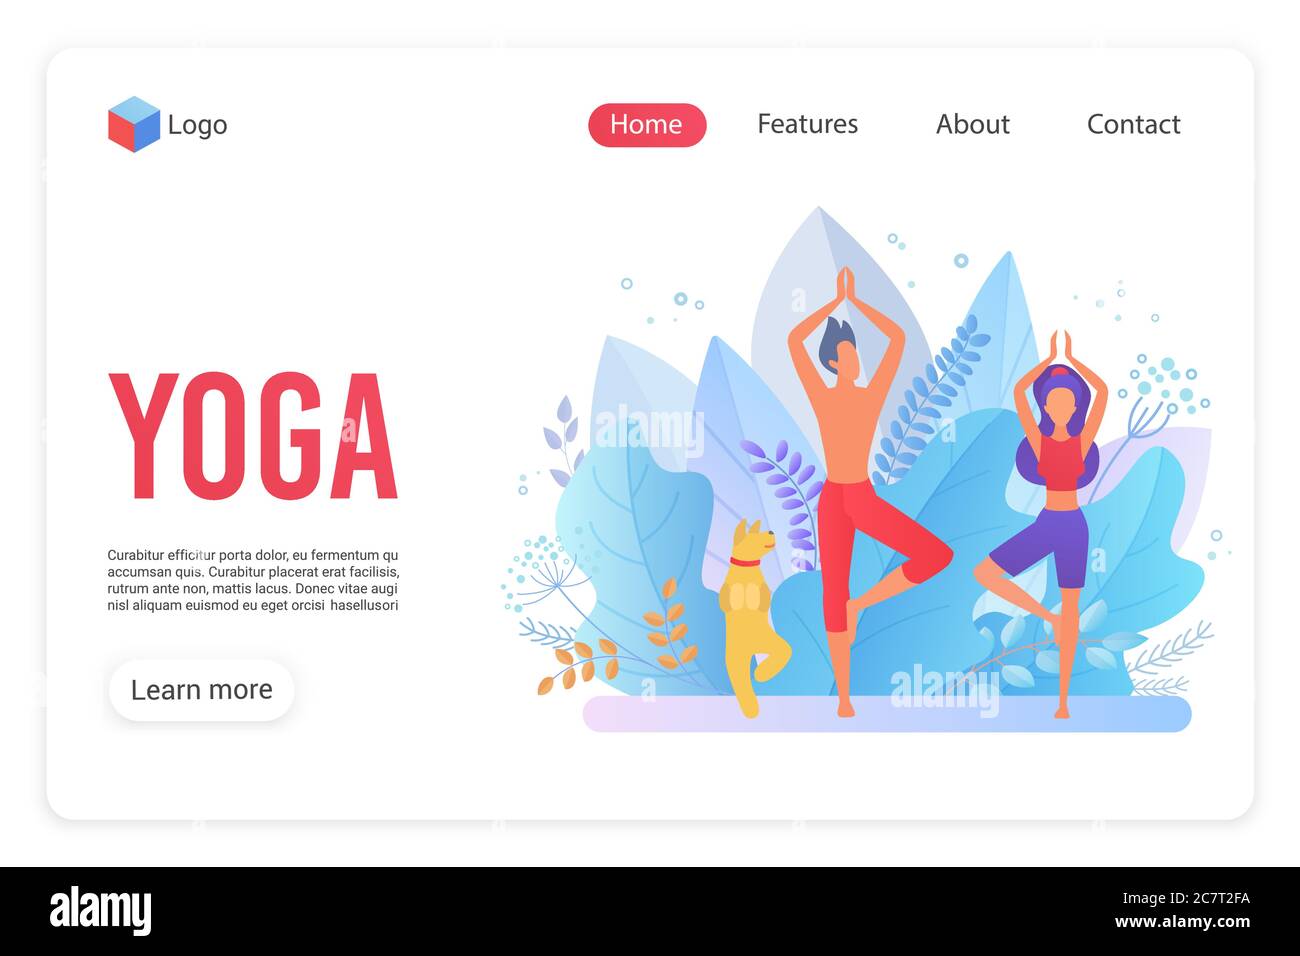 Yoga family classes flat landing page template. Meditation exercise website homepage layout. Man and woman couple with dog in concentration pose. Pilates workout web banner design vector illustration Stock Vector